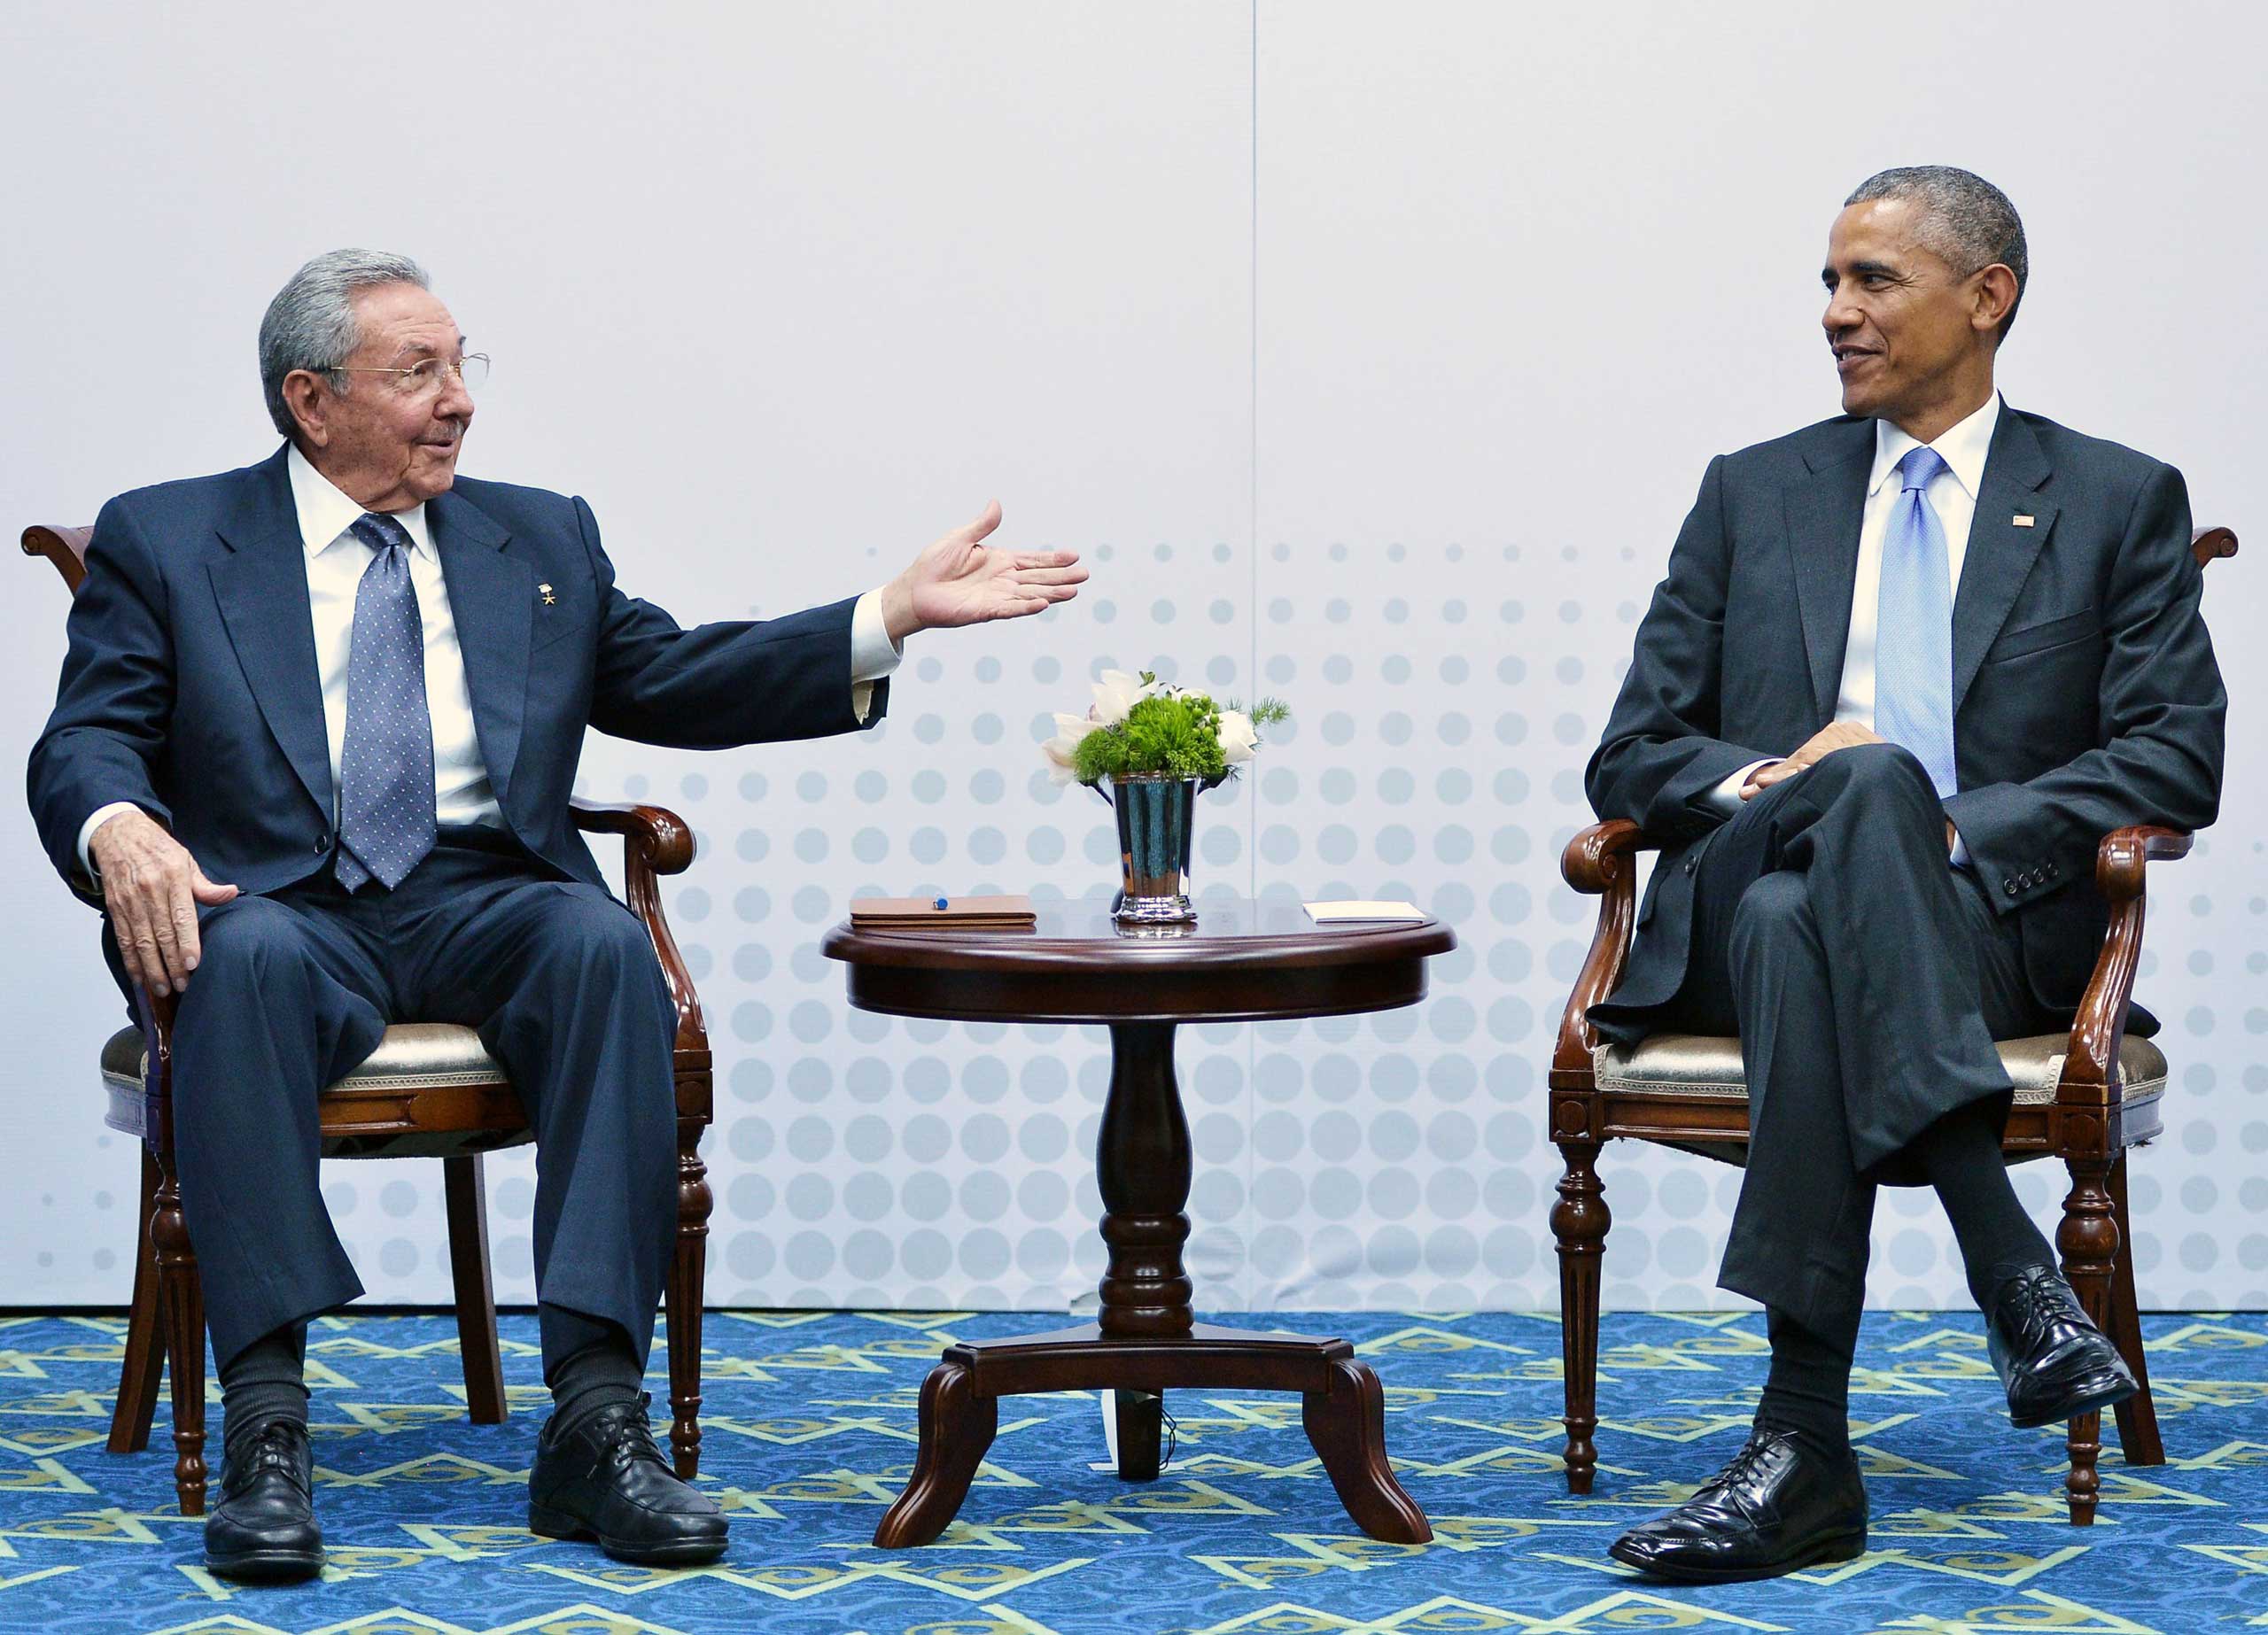 Cuban President Raul Castro speaks during a meeting with President Barack Obama on the sidelines of the Summit of the Americas at the ATLAPA Convention center in Panama City, on April 11, 2015. (Mandel Ngan—AFP/Getty Images)